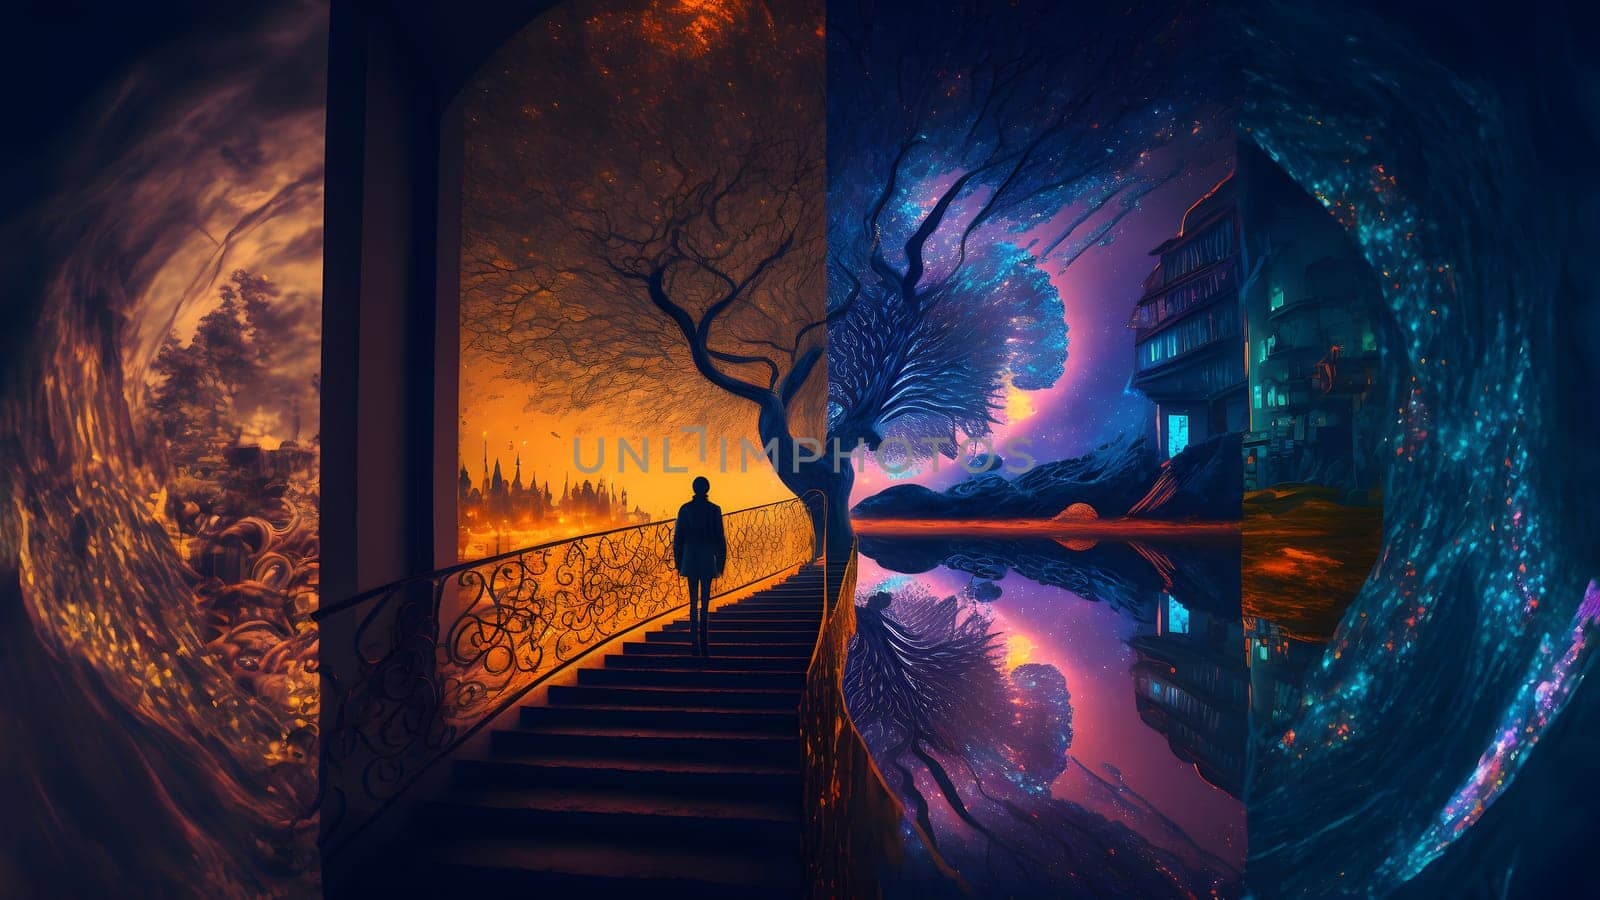 surreal magic fantasy worlds wallpaper divided in four vertical stripes, neural network generated art. Digitally generated image. Not based on any actual person, scene or pattern.